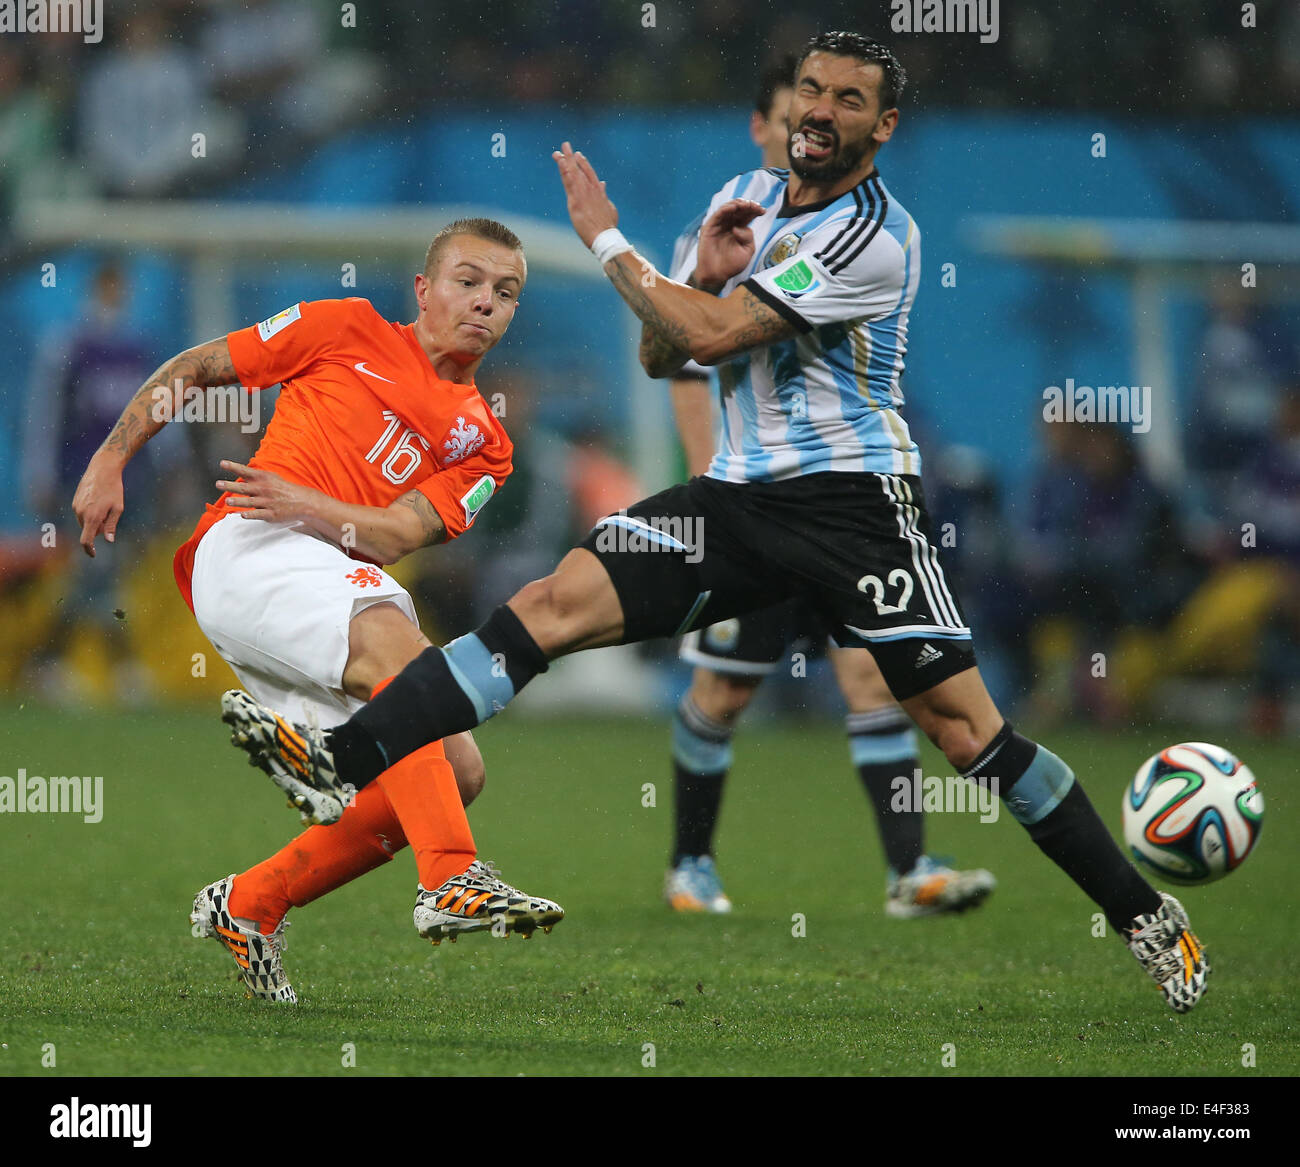 Sao Paulo, Brazil. 9th July, 2014. Netherlands' Jordy Clasie vies with Argentina's Ezequiel Lavezzi during a semifinal match between Netherlands and Argentina of 2014 FIFA World Cup at the Arena de Sao Paulo Stadium in Sao Paulo, Brazil, on July 9, 2014. Credit:  Xu Zijian/Xinhua/Alamy Live News Stock Photo